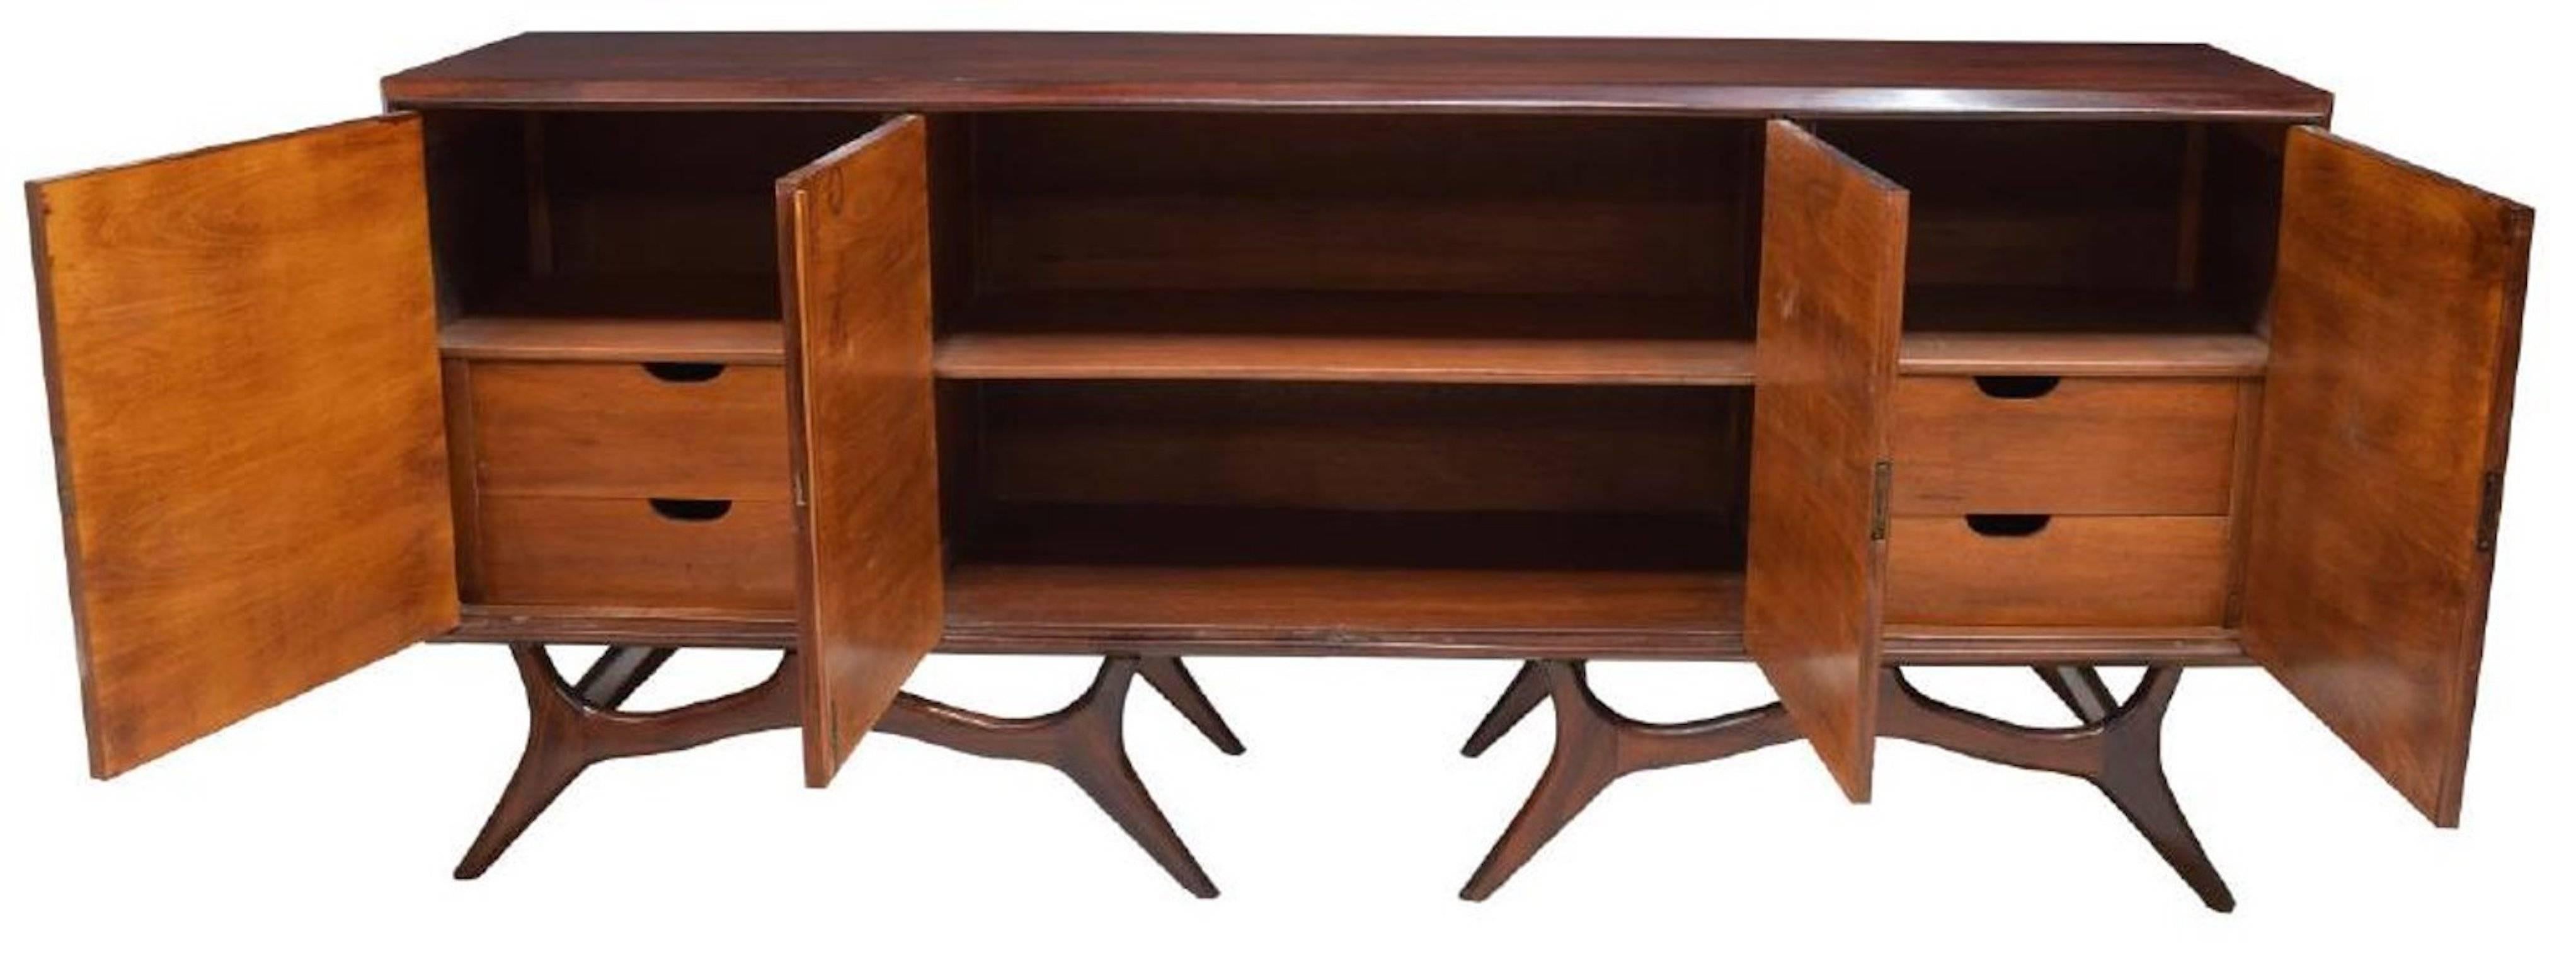 Mid-Century Modern Brazilian rosewood four-door sideboard, circa 1960, with long rectangular case fitted with four cabinets, centre double-door cabinet opening to shelves, flanked by side cabinets with two interior drawers each, rising on two sets